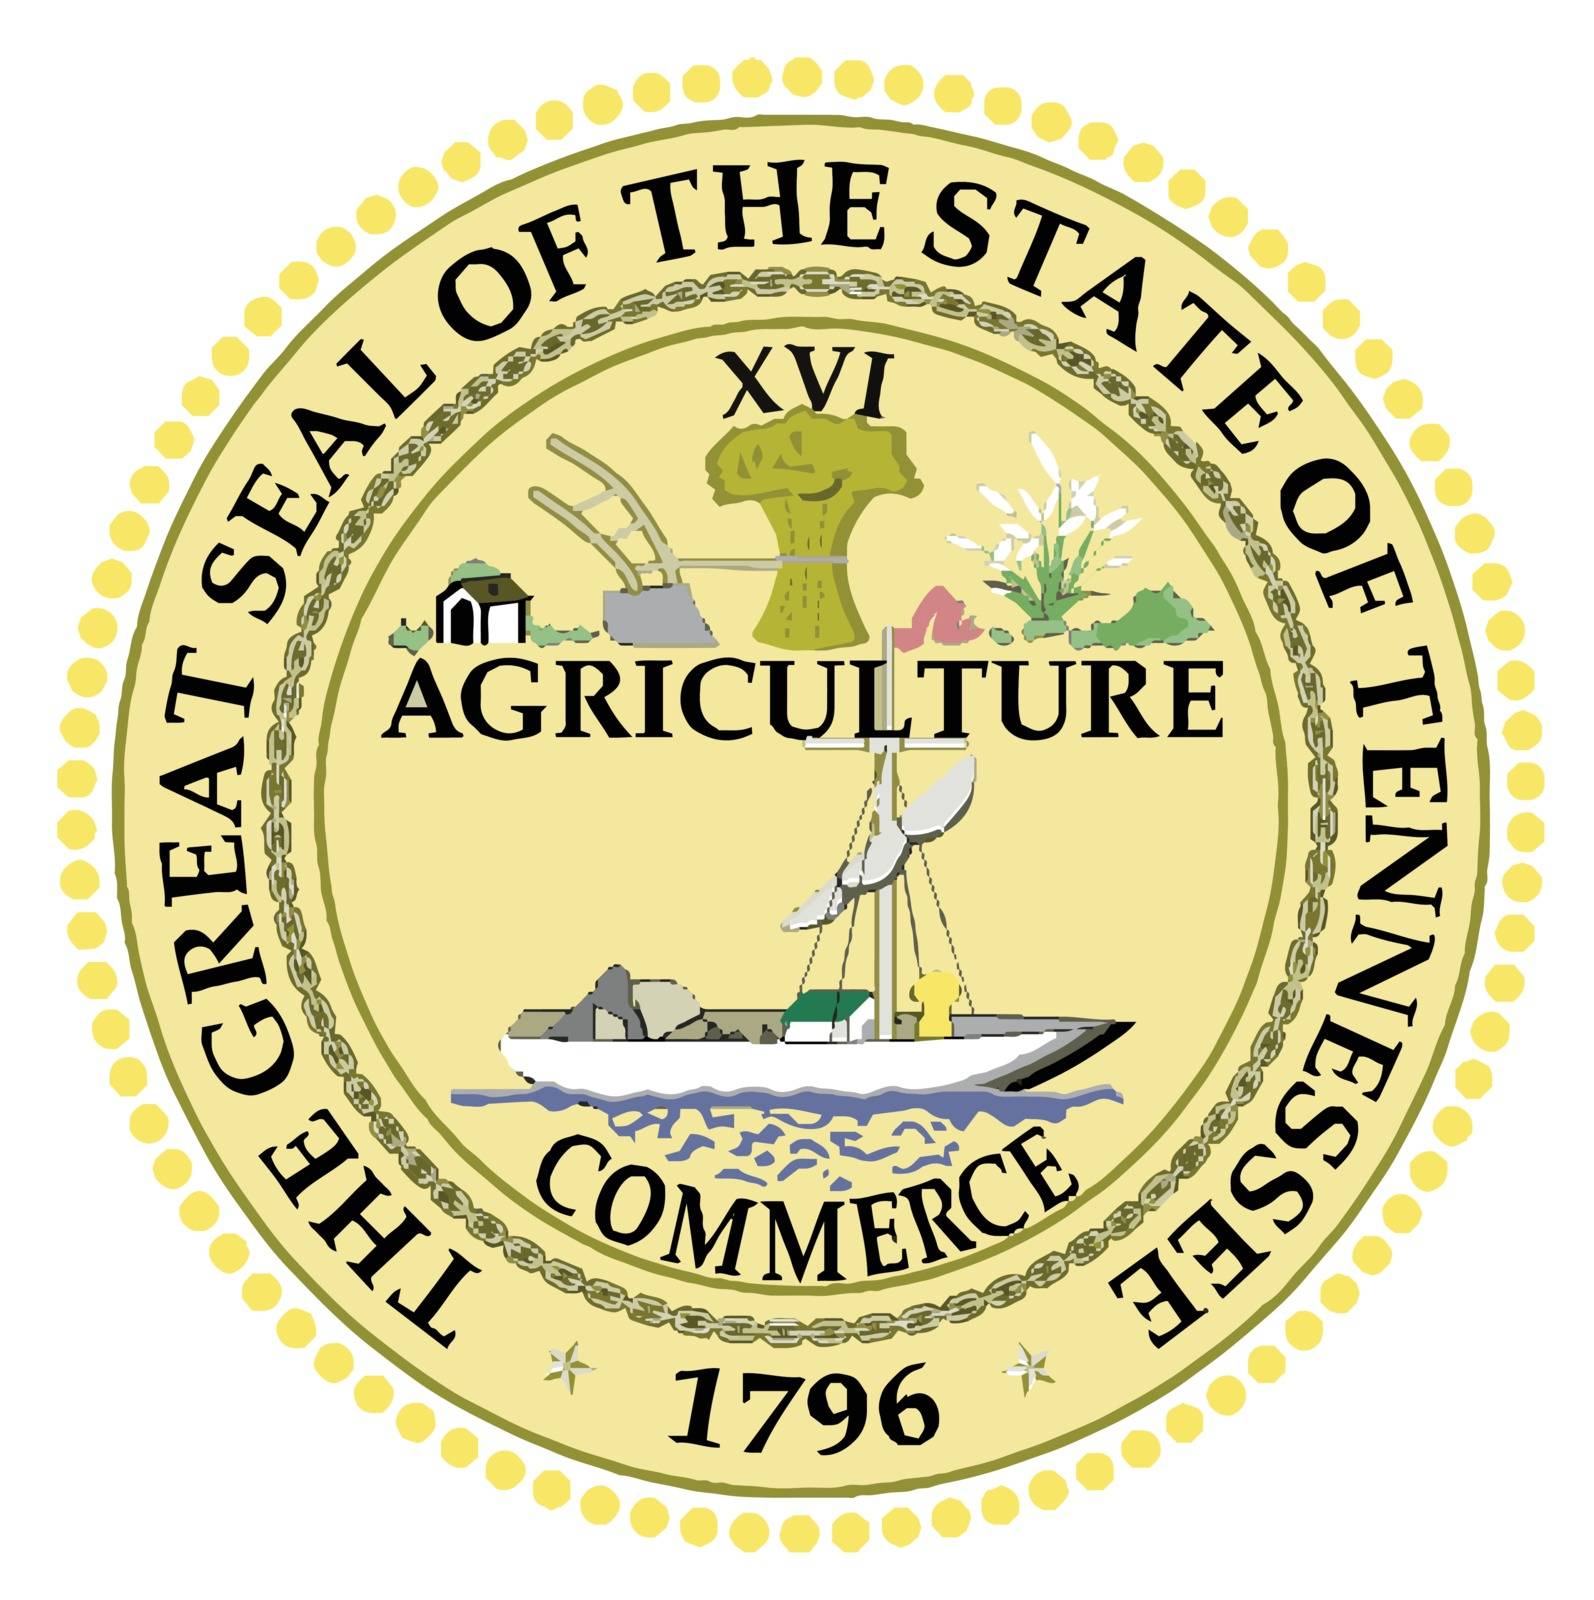 The State Seal of Tennessee on a white background